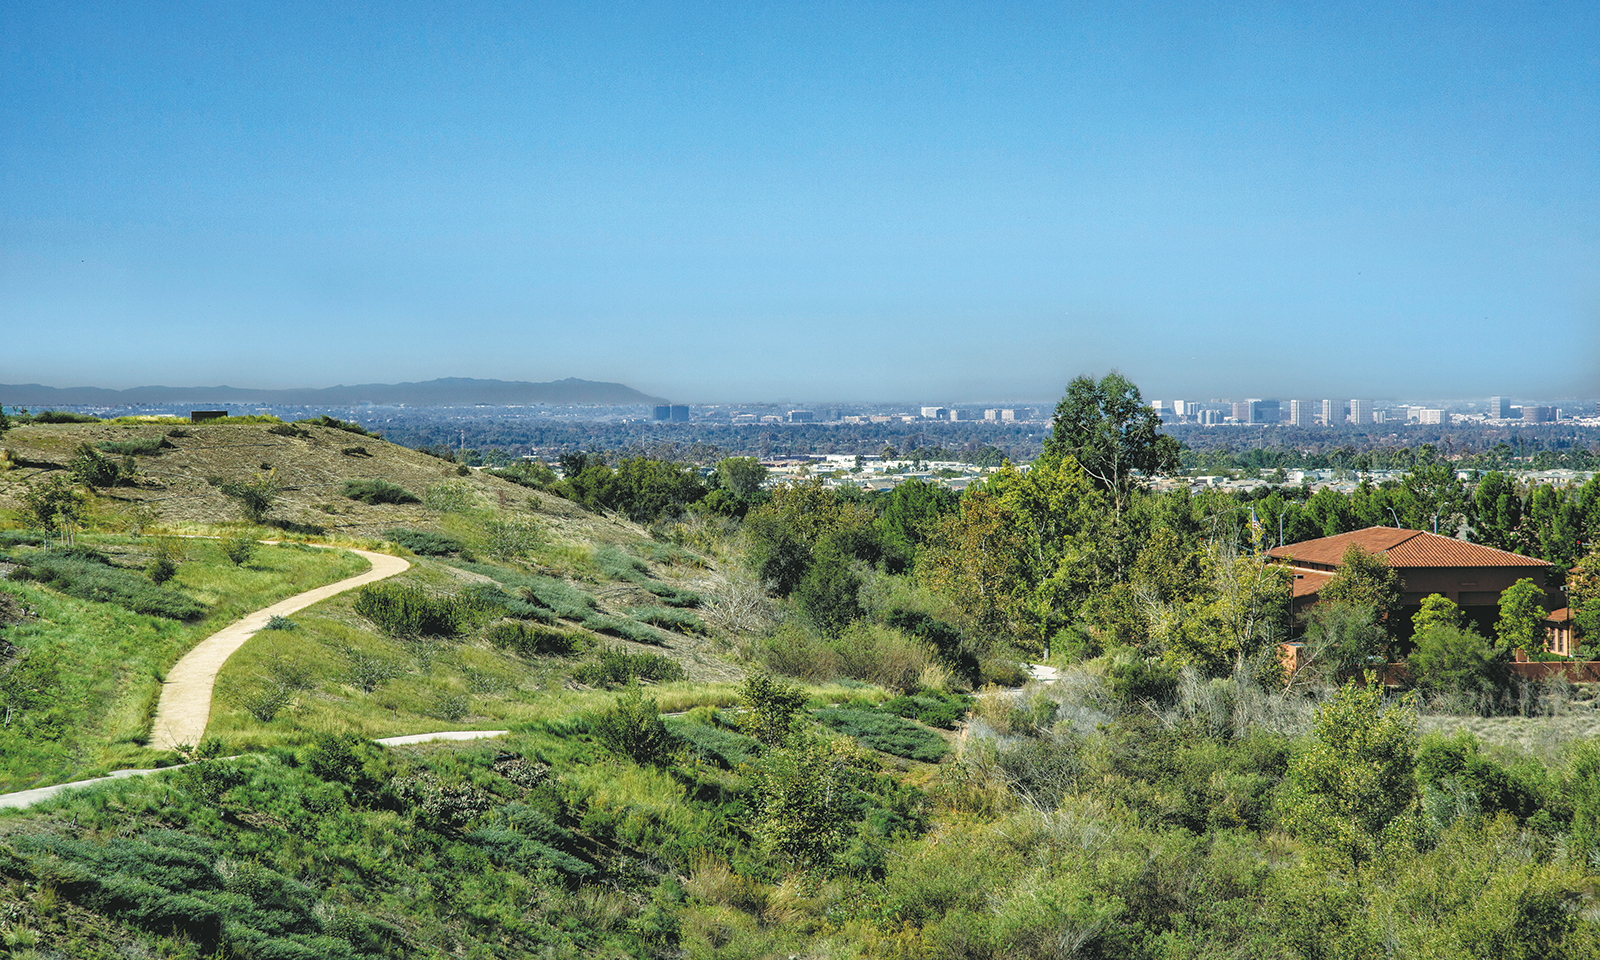 Portola Springs: Views from the top of Irvine